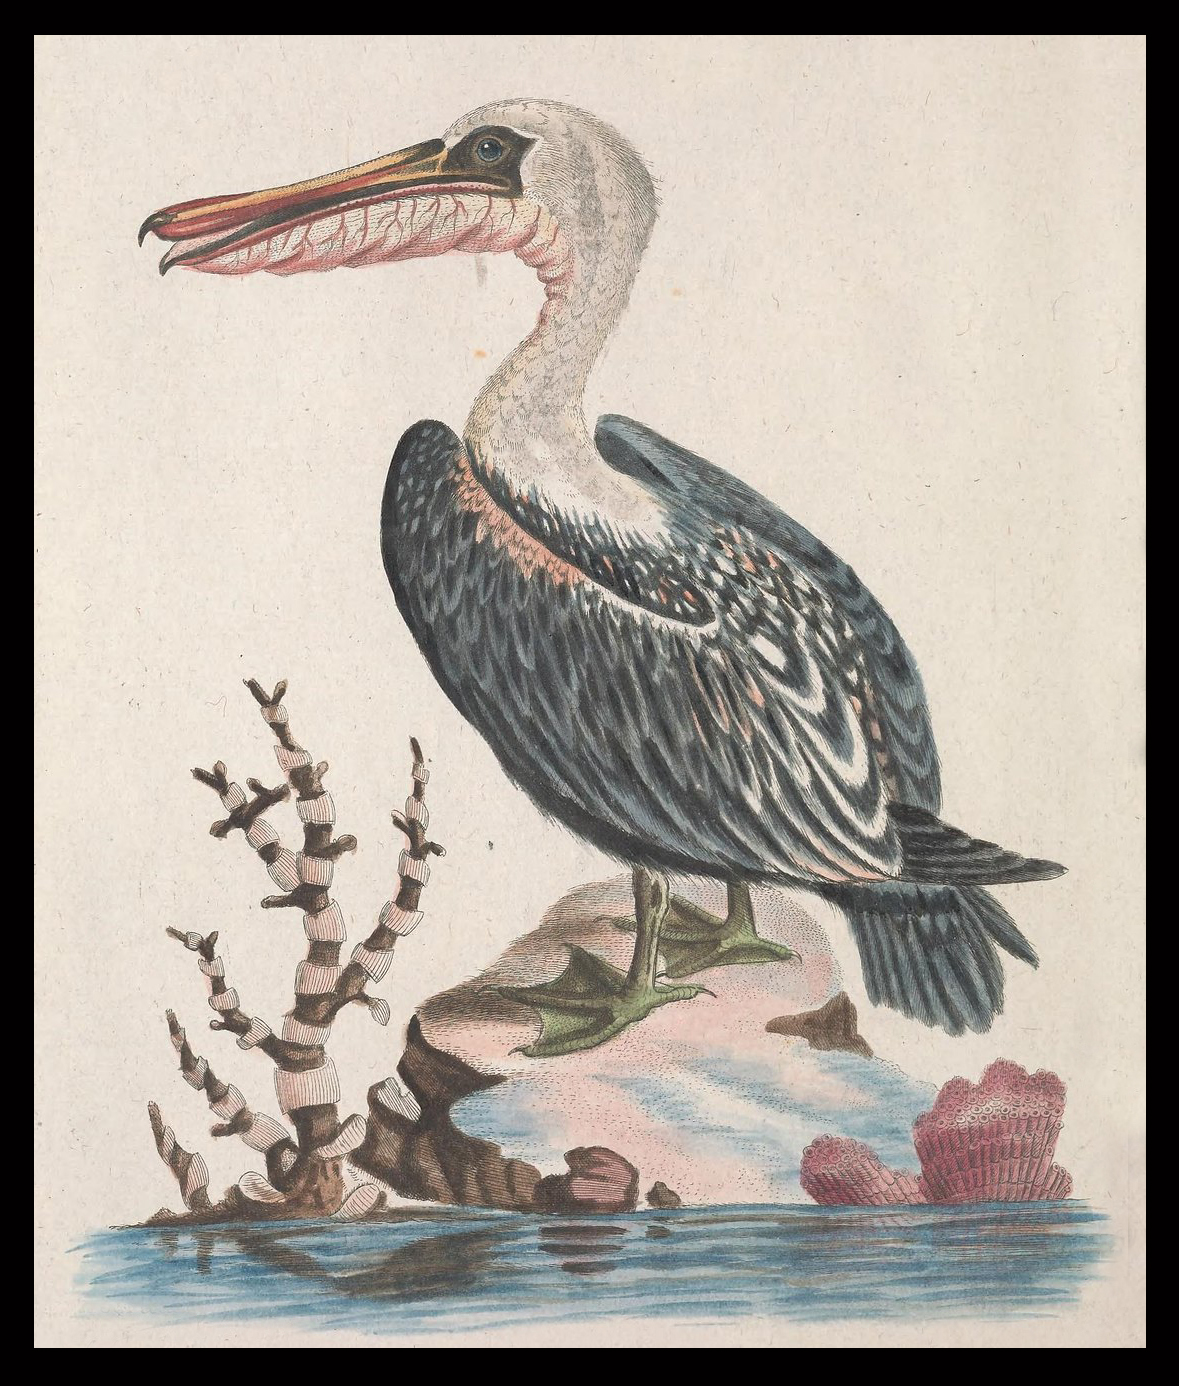 Drawing of Pelican © Biodiversity Heritage Library; public domain